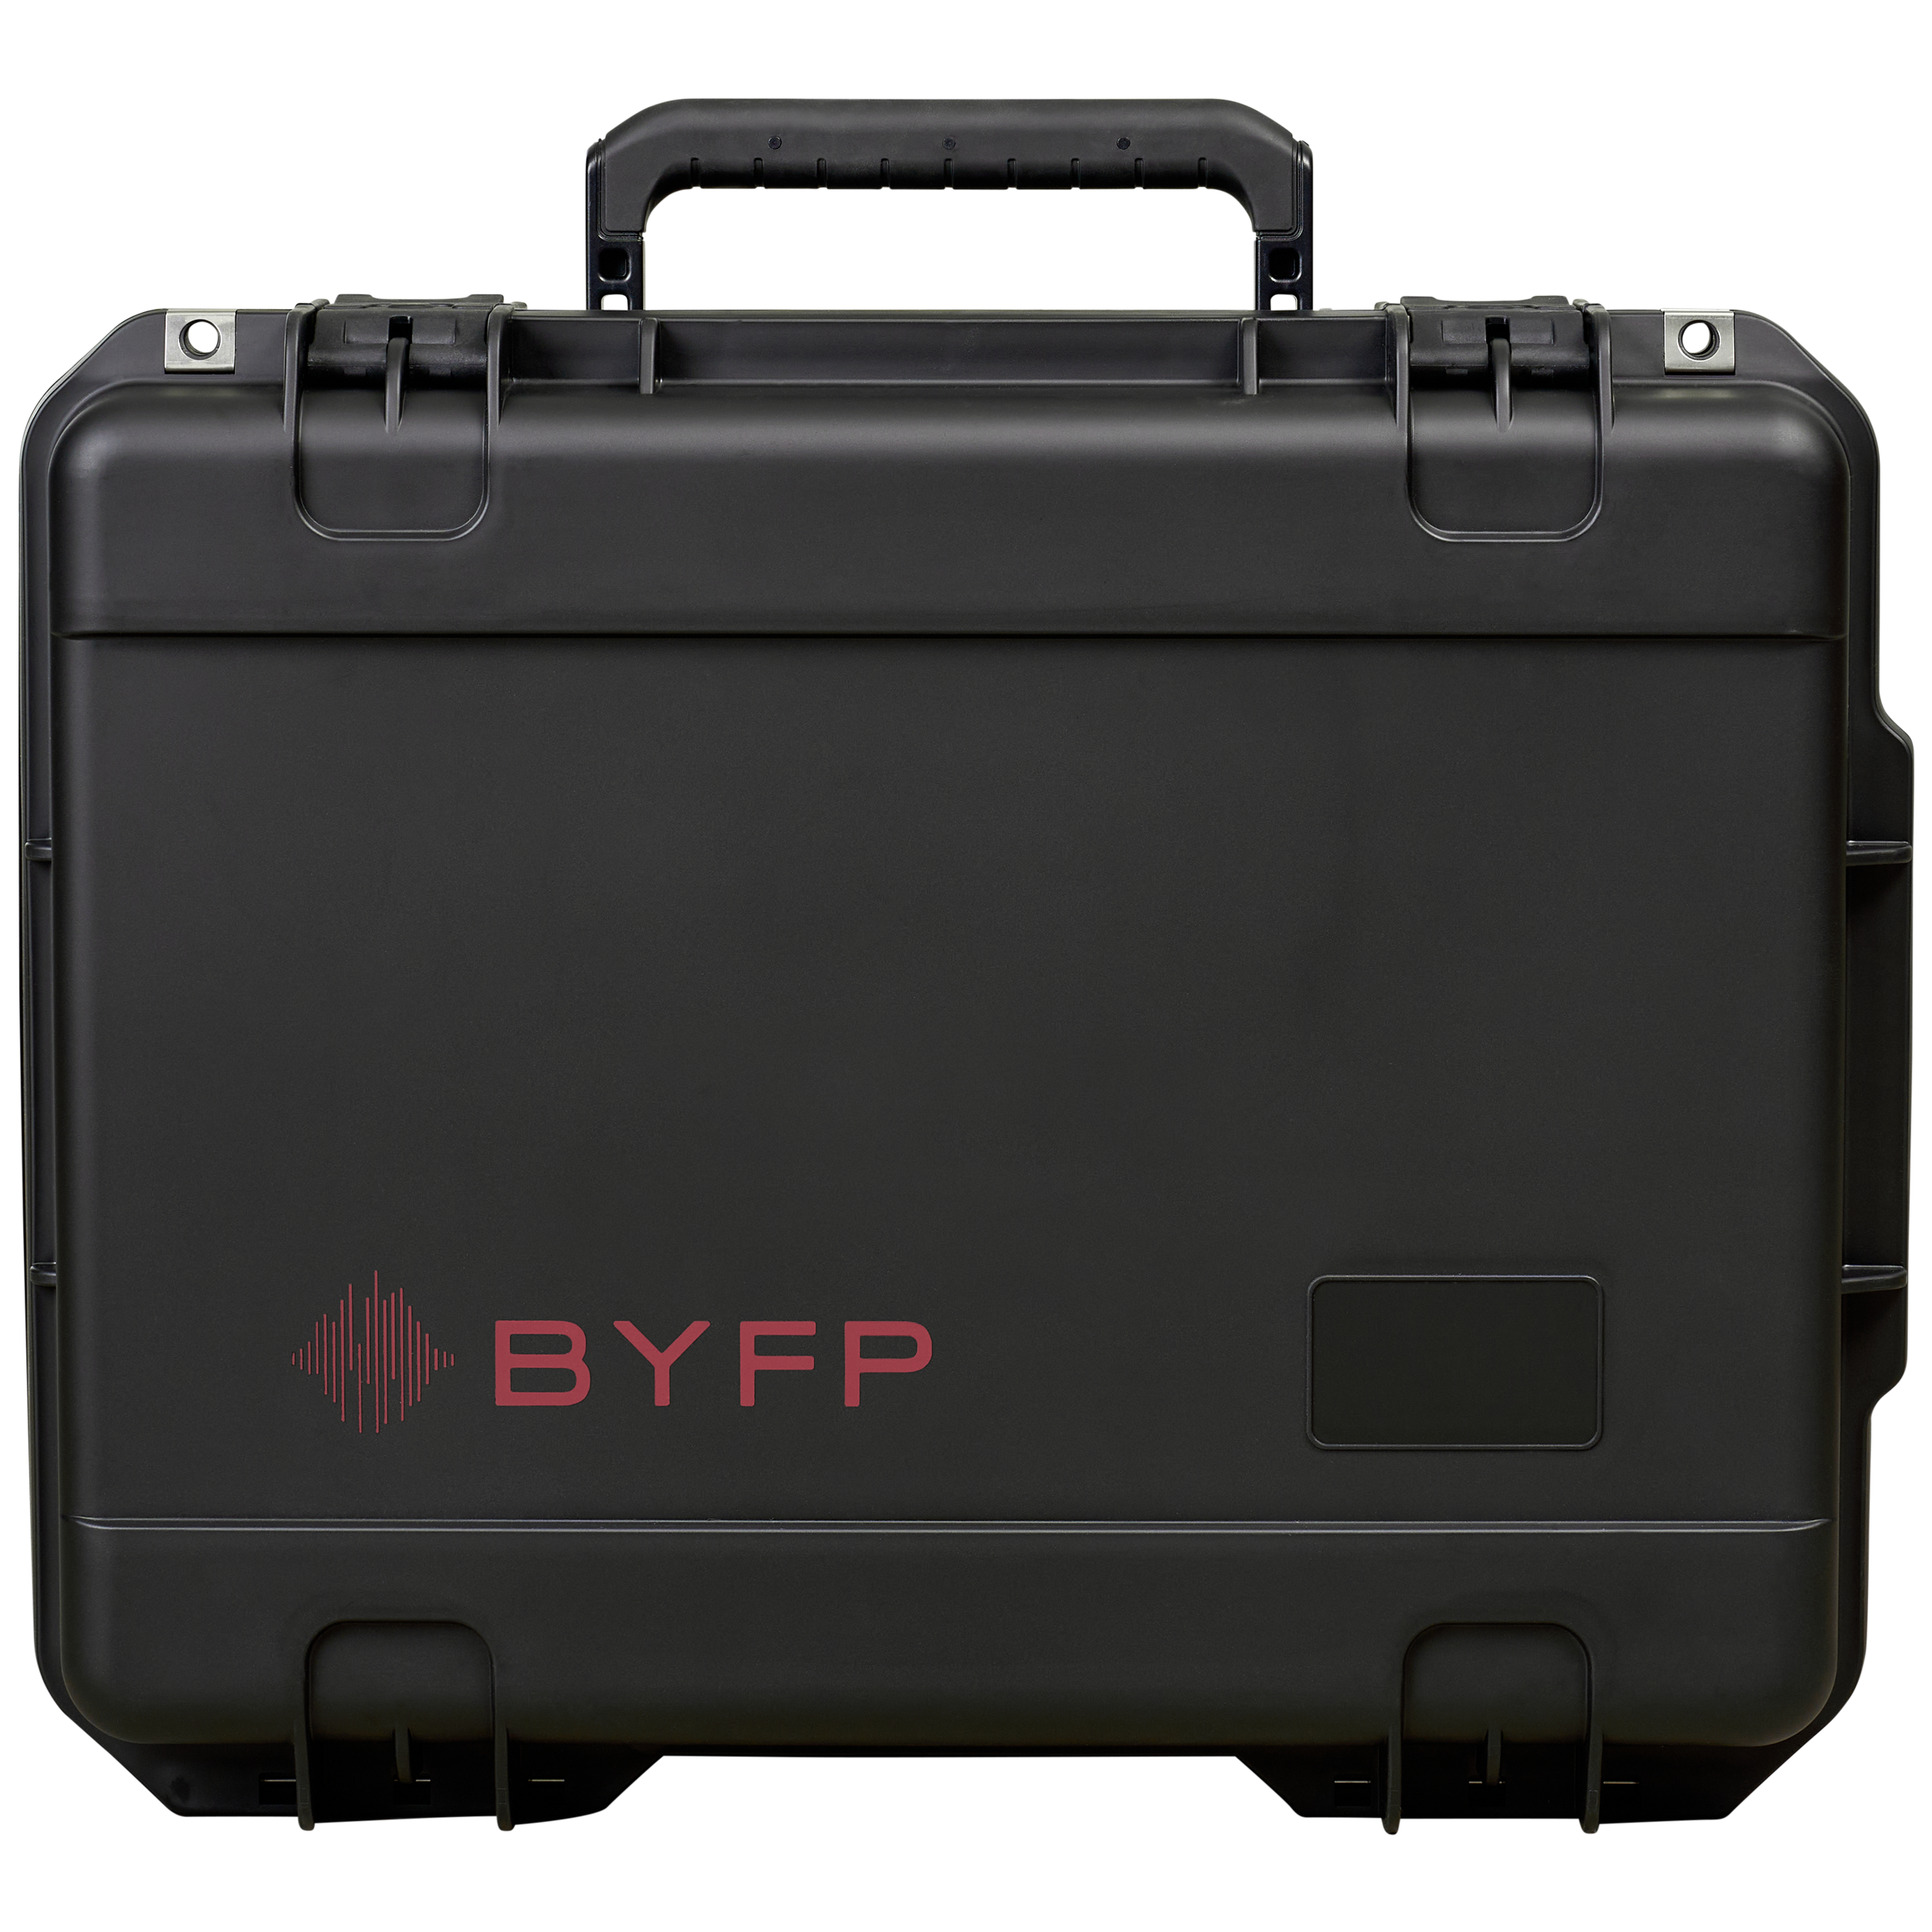 Pioneer PLX-CRSS12 tourPack with BYFP ipCase